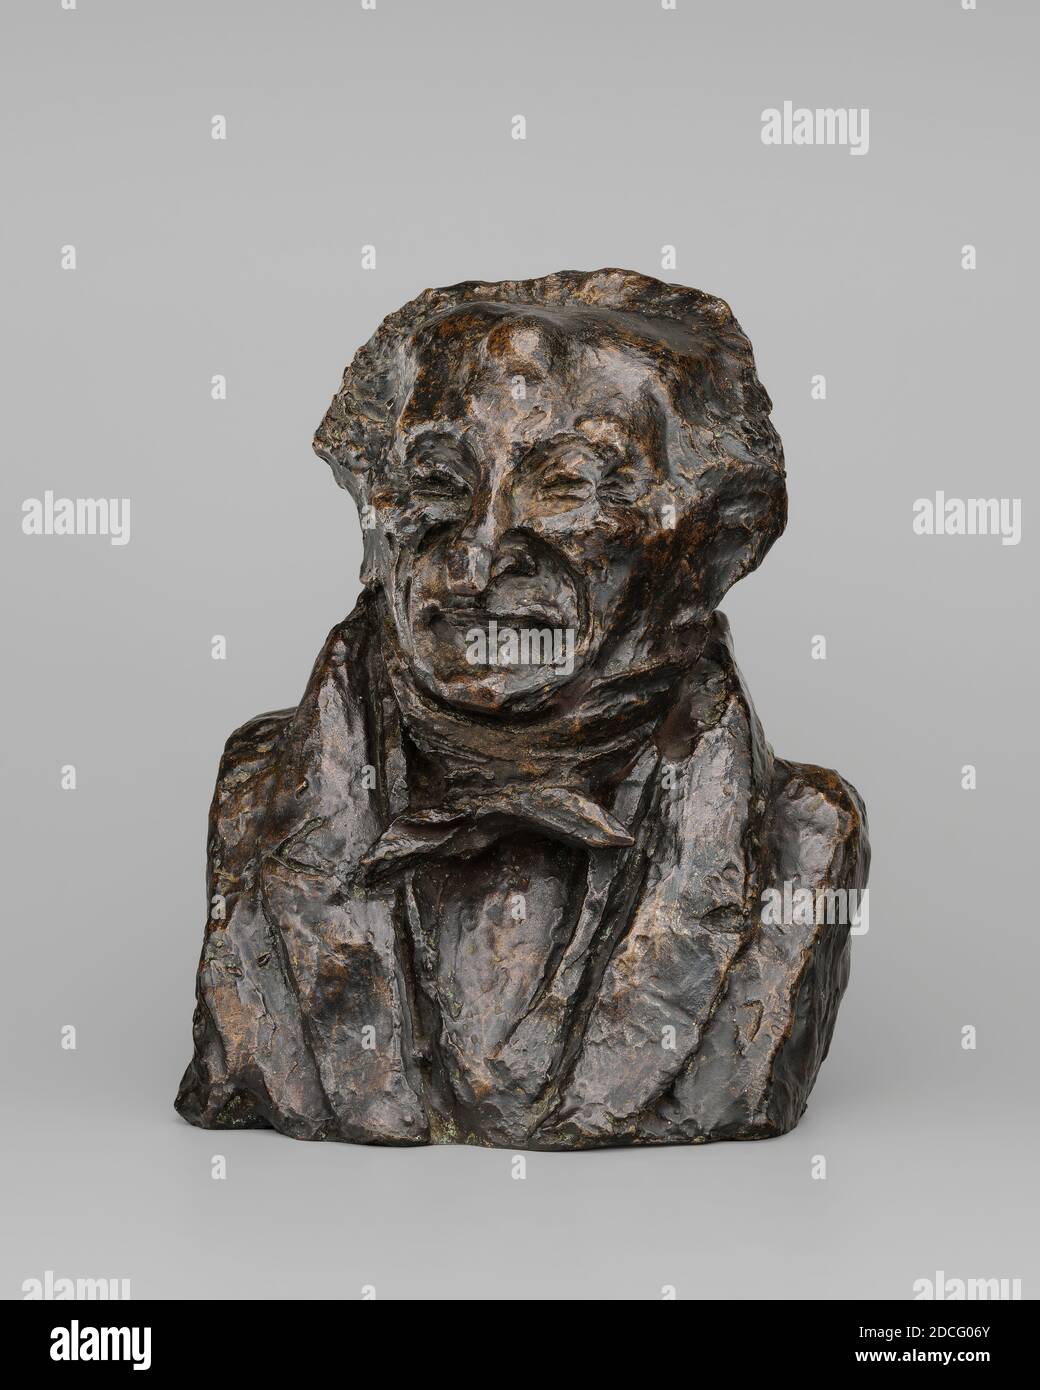 Honoré Daumier, (artist), French, 1808 - 1879, Alexandre-Simon Pataille, model c. 1832/1835, cast 1929/1950, bronze, overall: 16.8 x 13.3 x 10.8 cm (6 5/8 x 5 1/4 x 4 1/4 in Stock Photo